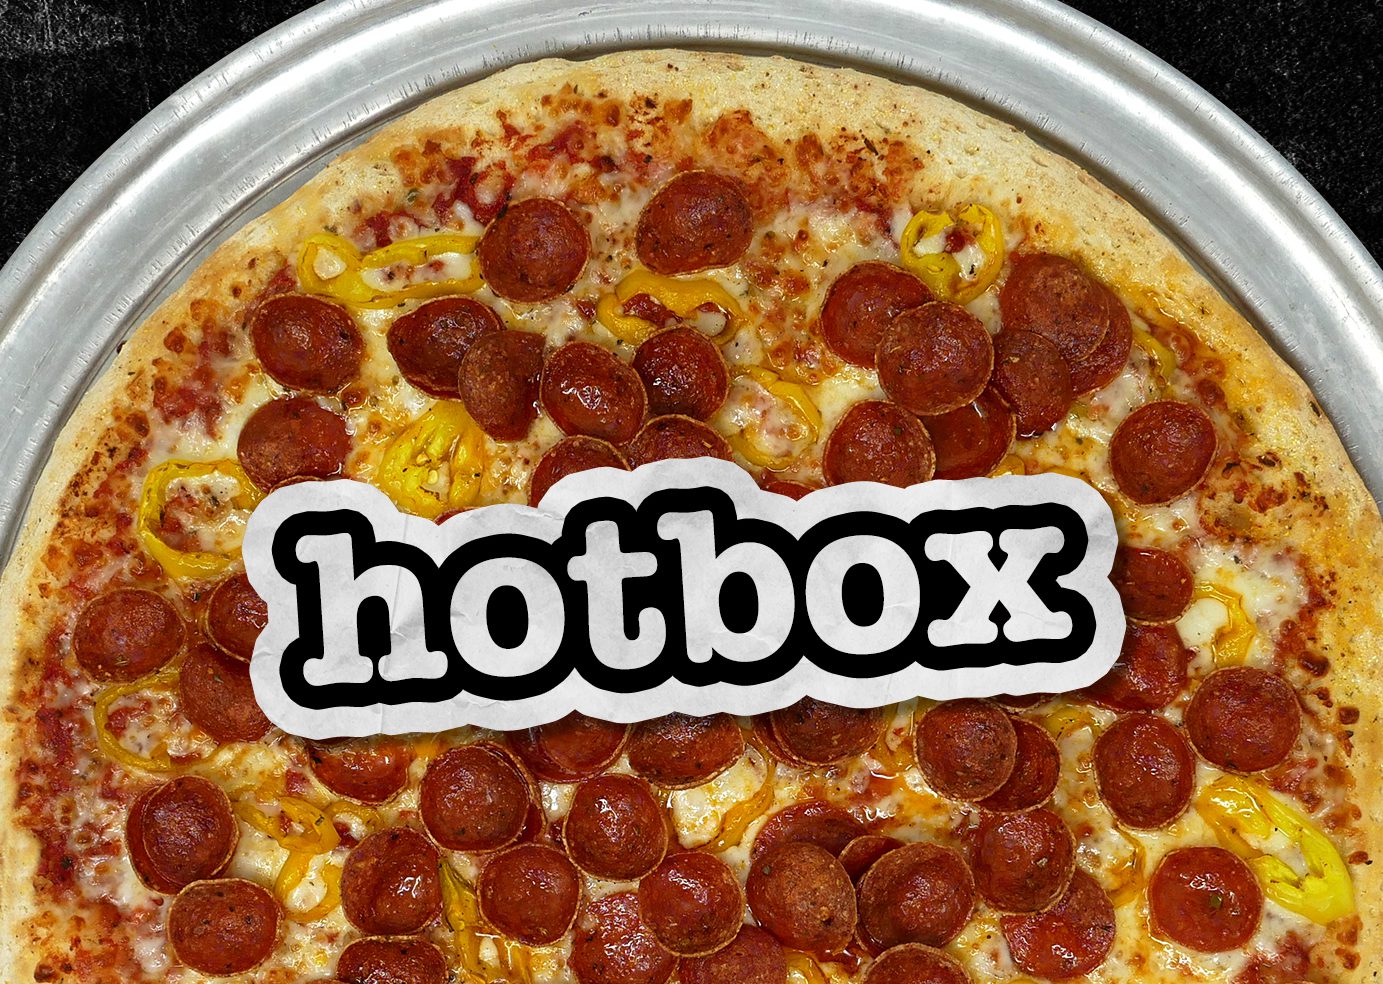 Hotbox Fast Food – Apps on Google Play